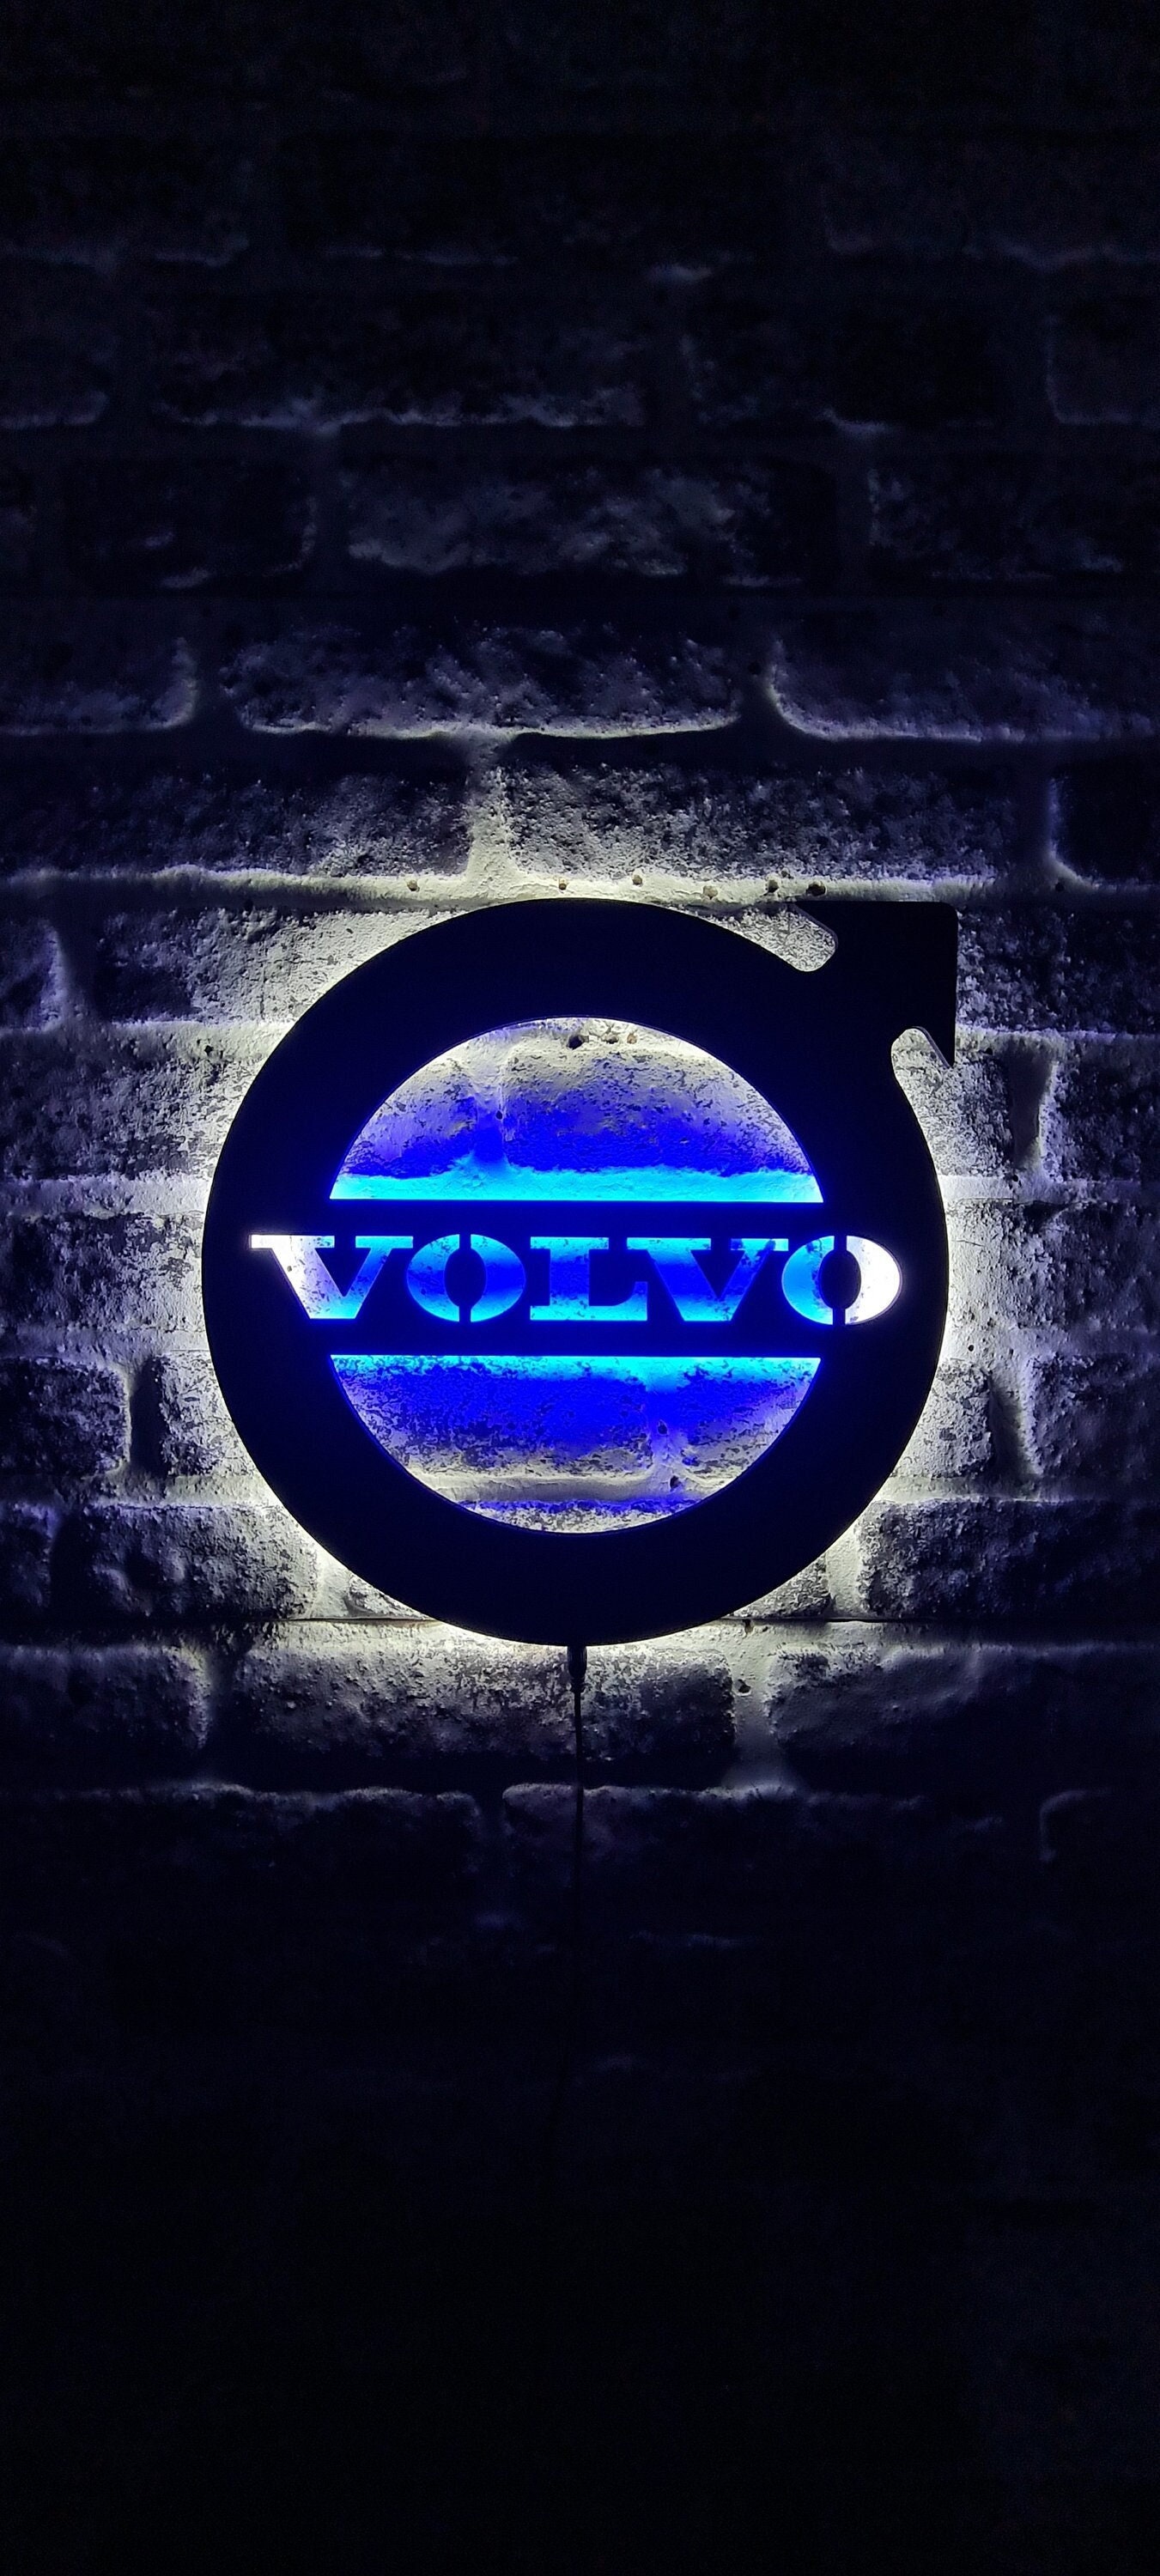 LED sign on the back wall VOLVO